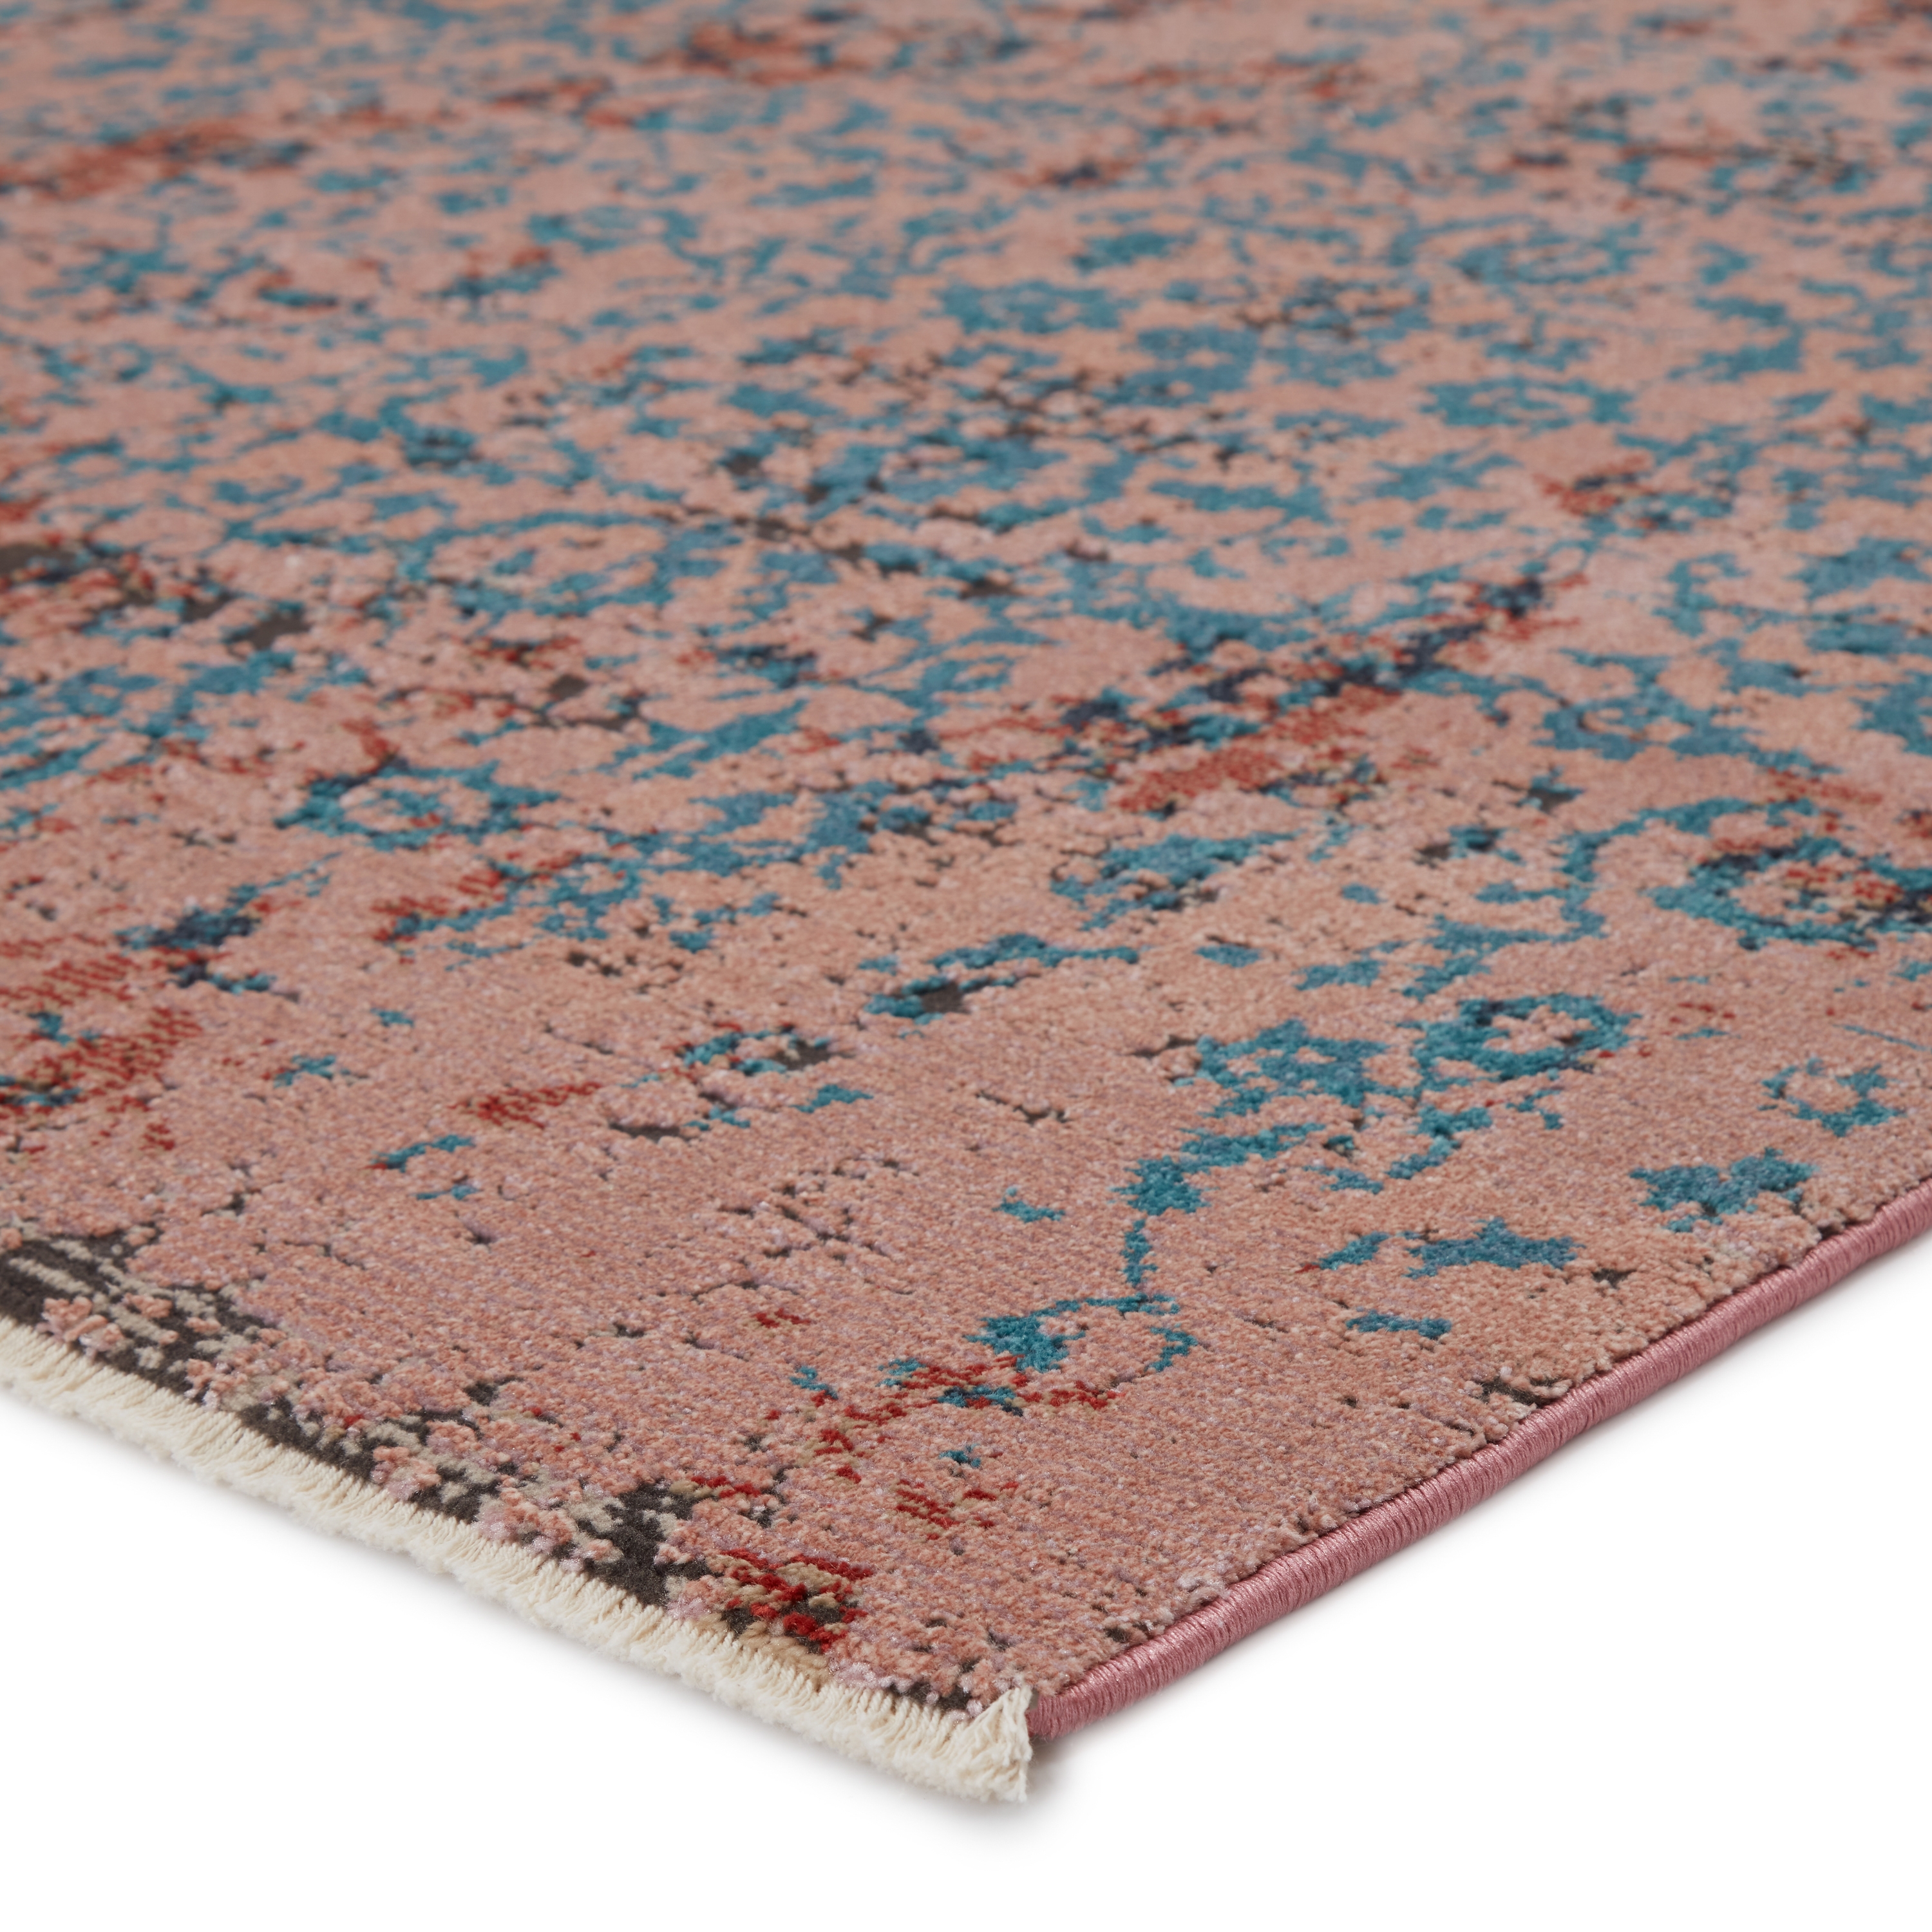 Vibe by Zea Trellis Pink/ Teal Area Rug (5'X7'6") - Image 1